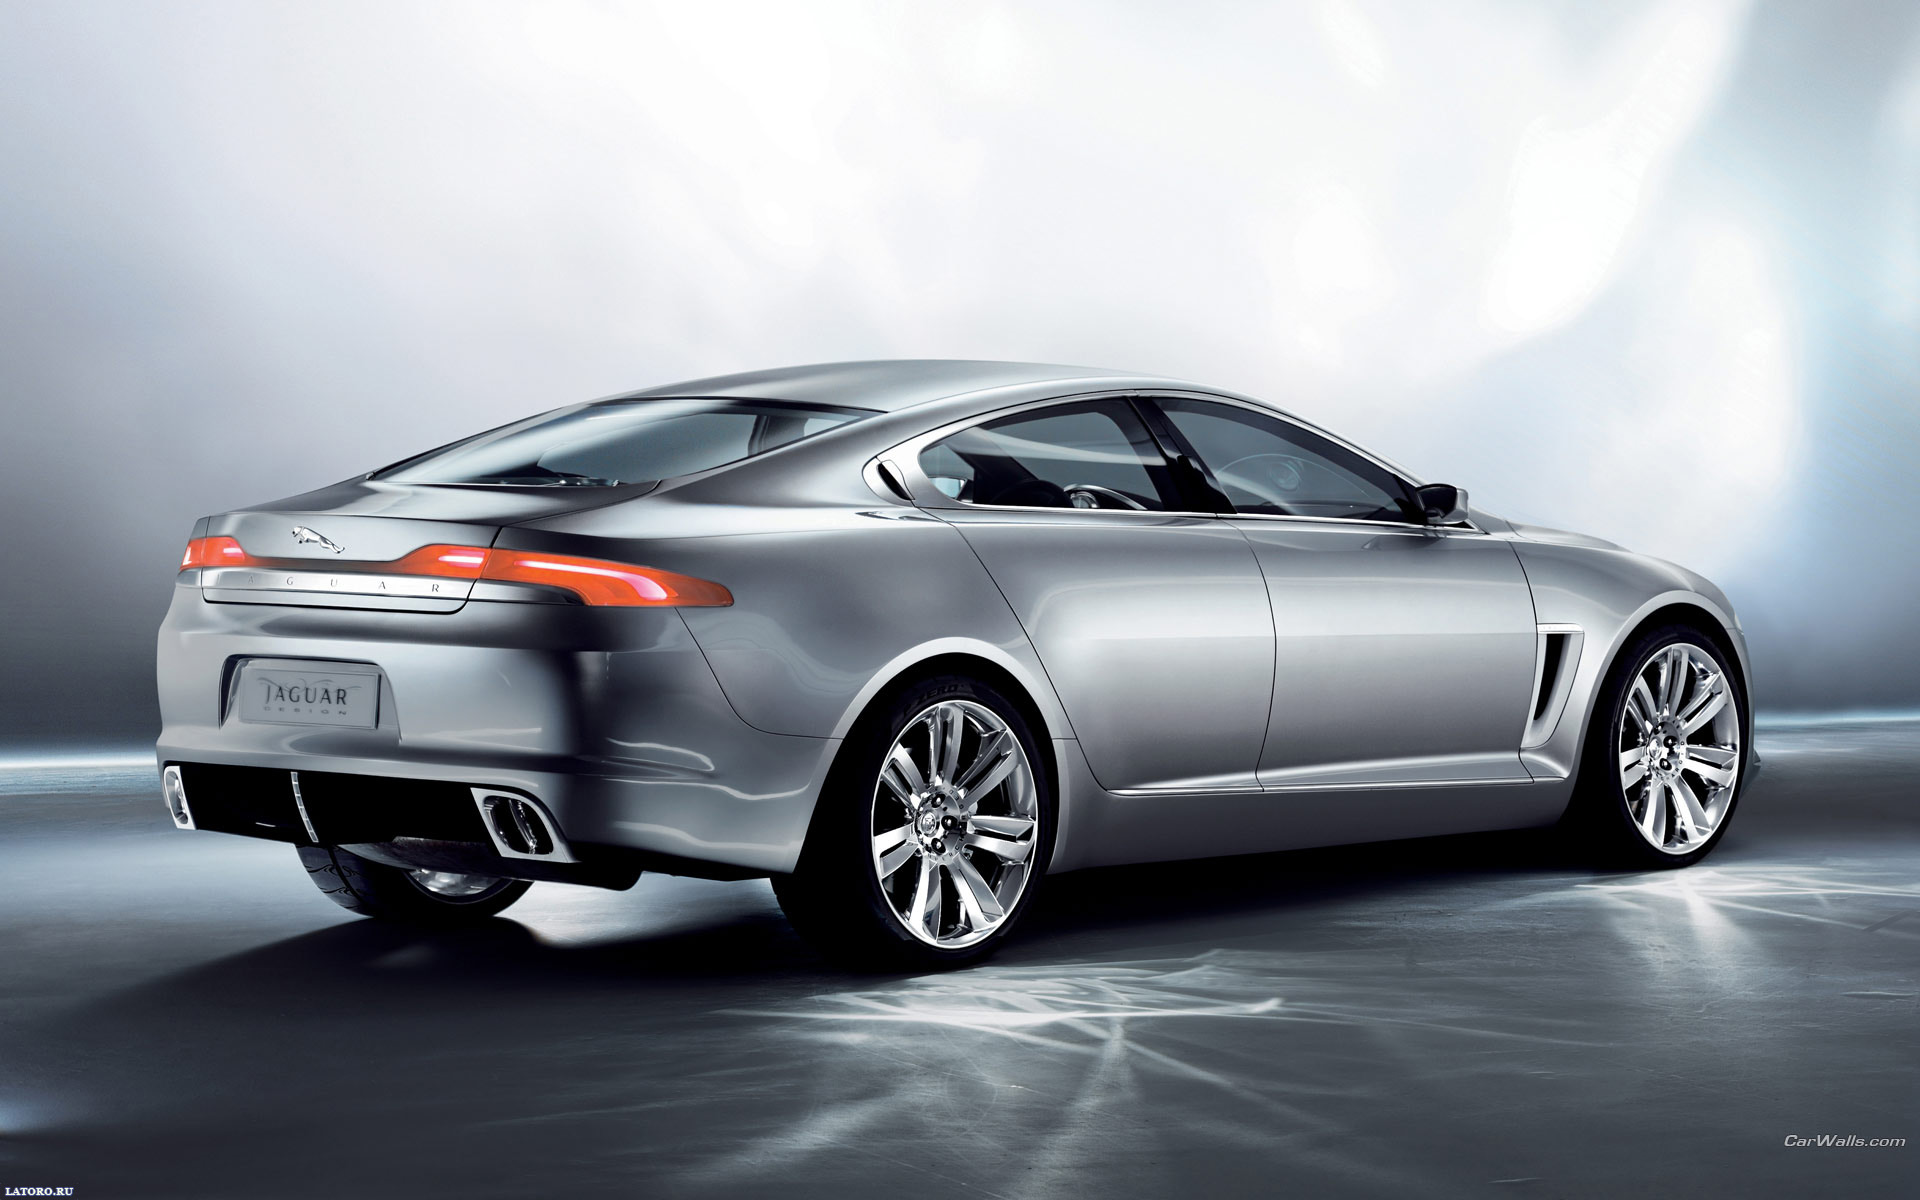 Check Out Some Cool Jaguar Xf Wallpaper